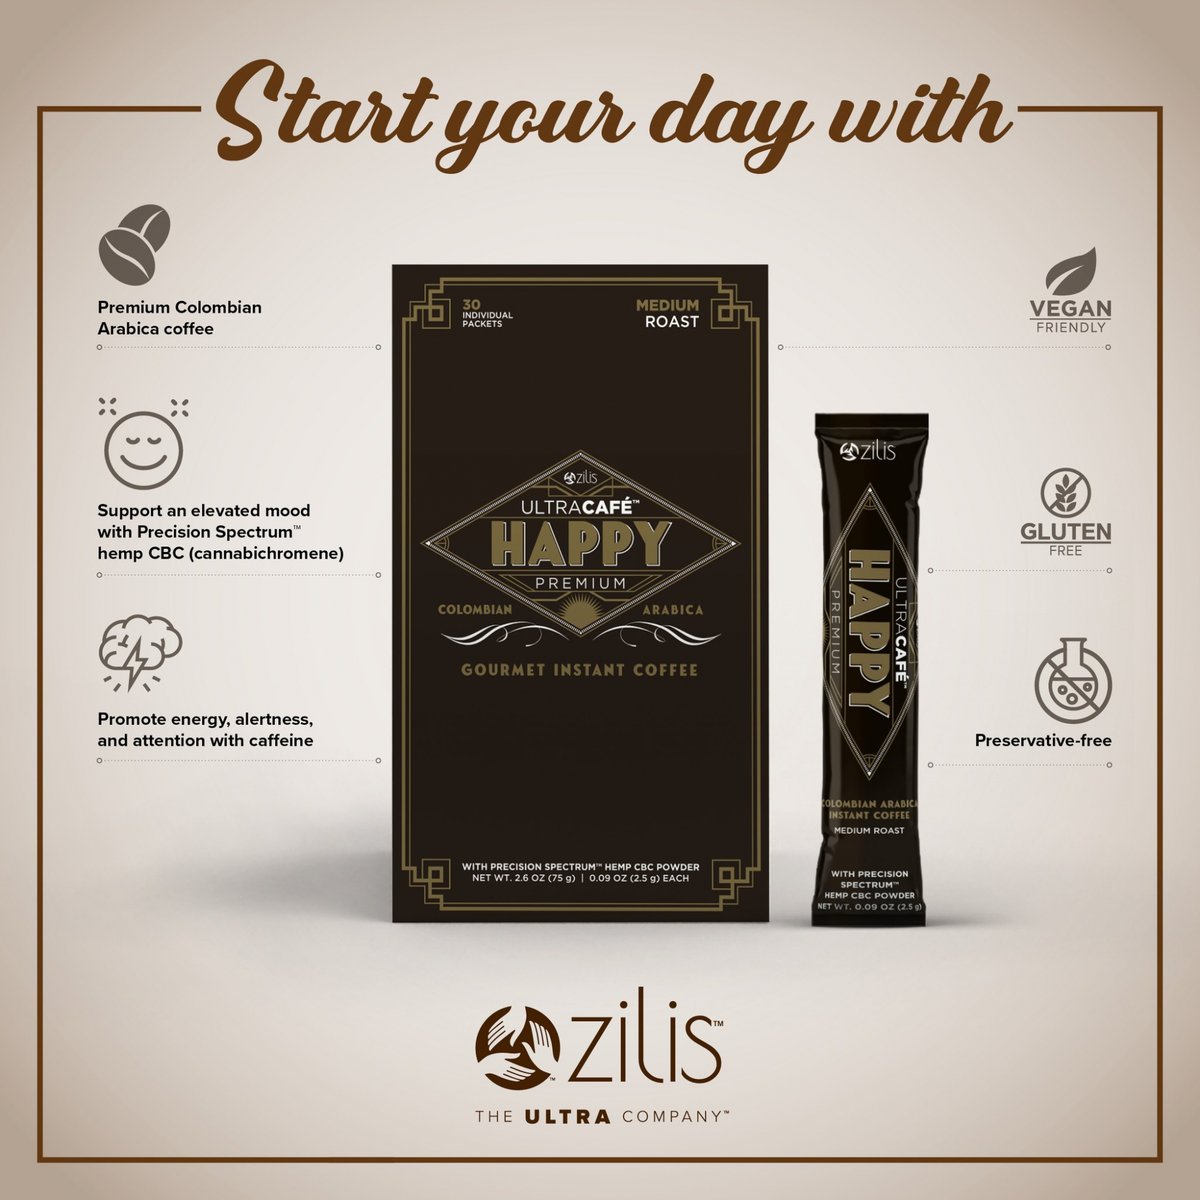 Looking for the perfect way to start your day? Try Zilis UltraCafe Happy Premium Gourmet Instant Coffee to support elevated moods and promote energy. #ultracafe #instantcoffee #wellness #health #hemp #cbc rgultrahealth.com